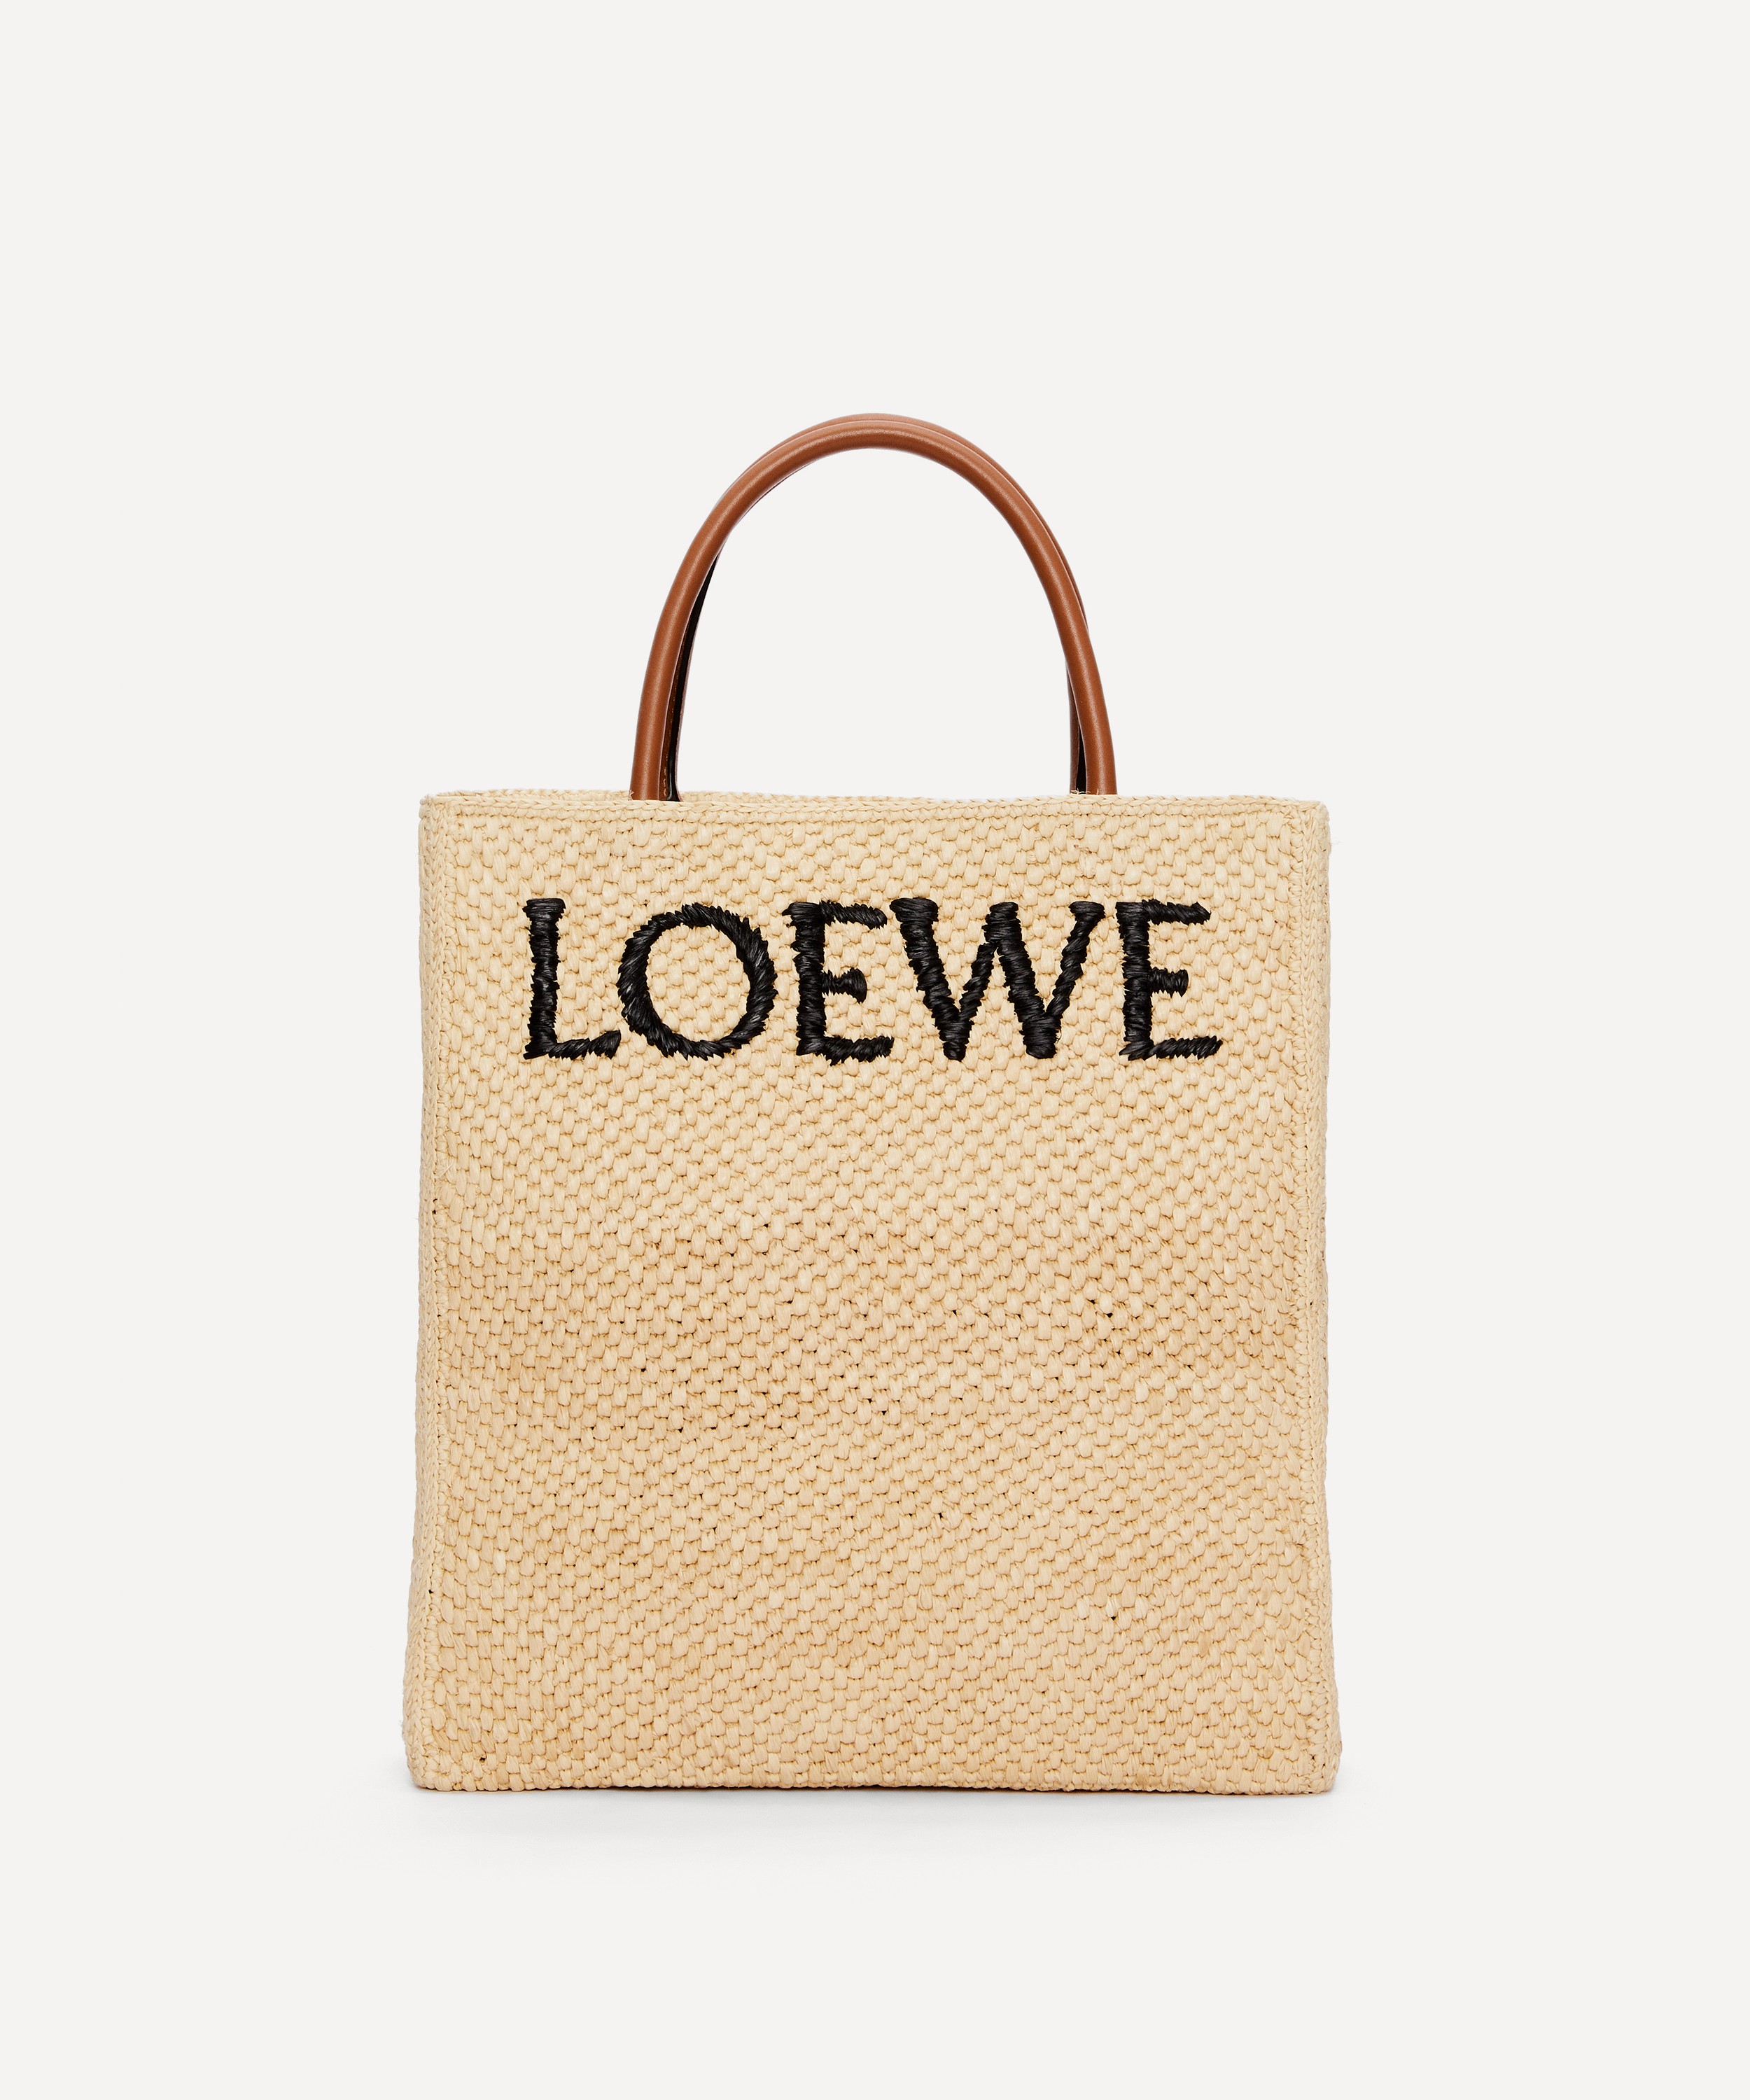 Shop LOEWE Stripes Calfskin Street Style Leather Straw Bags by